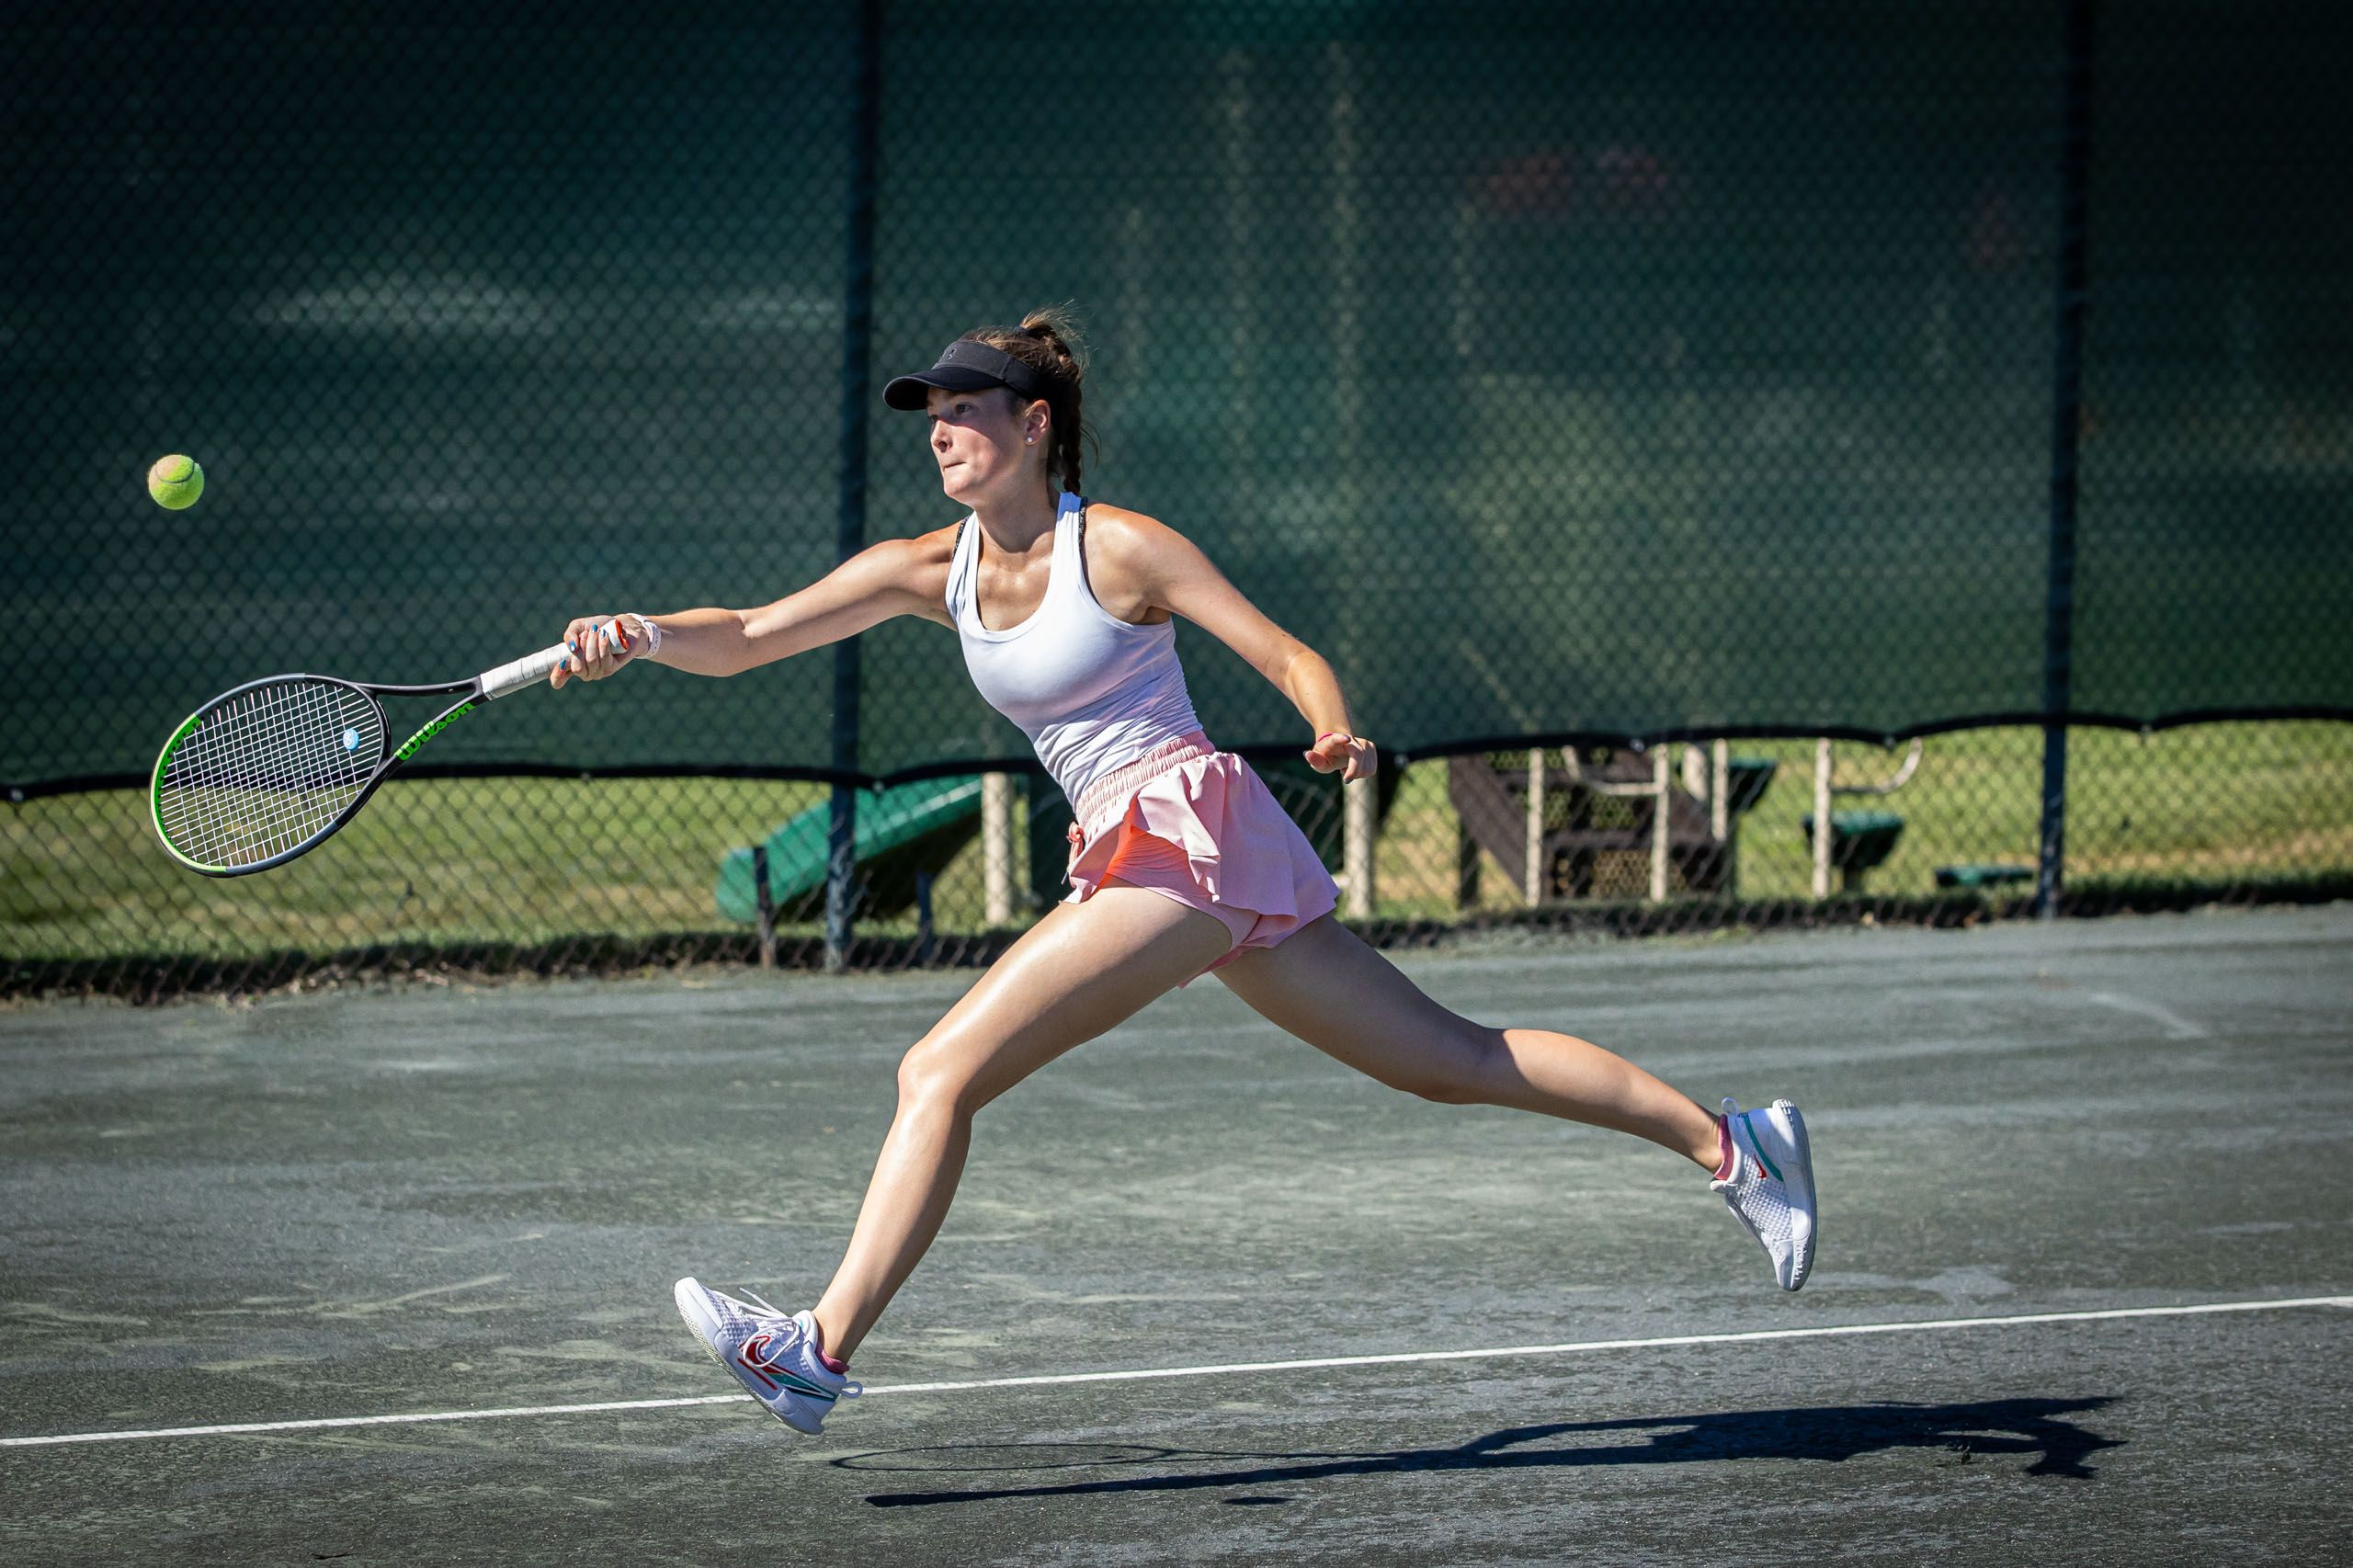 Woman Lunges for Tennis Ball